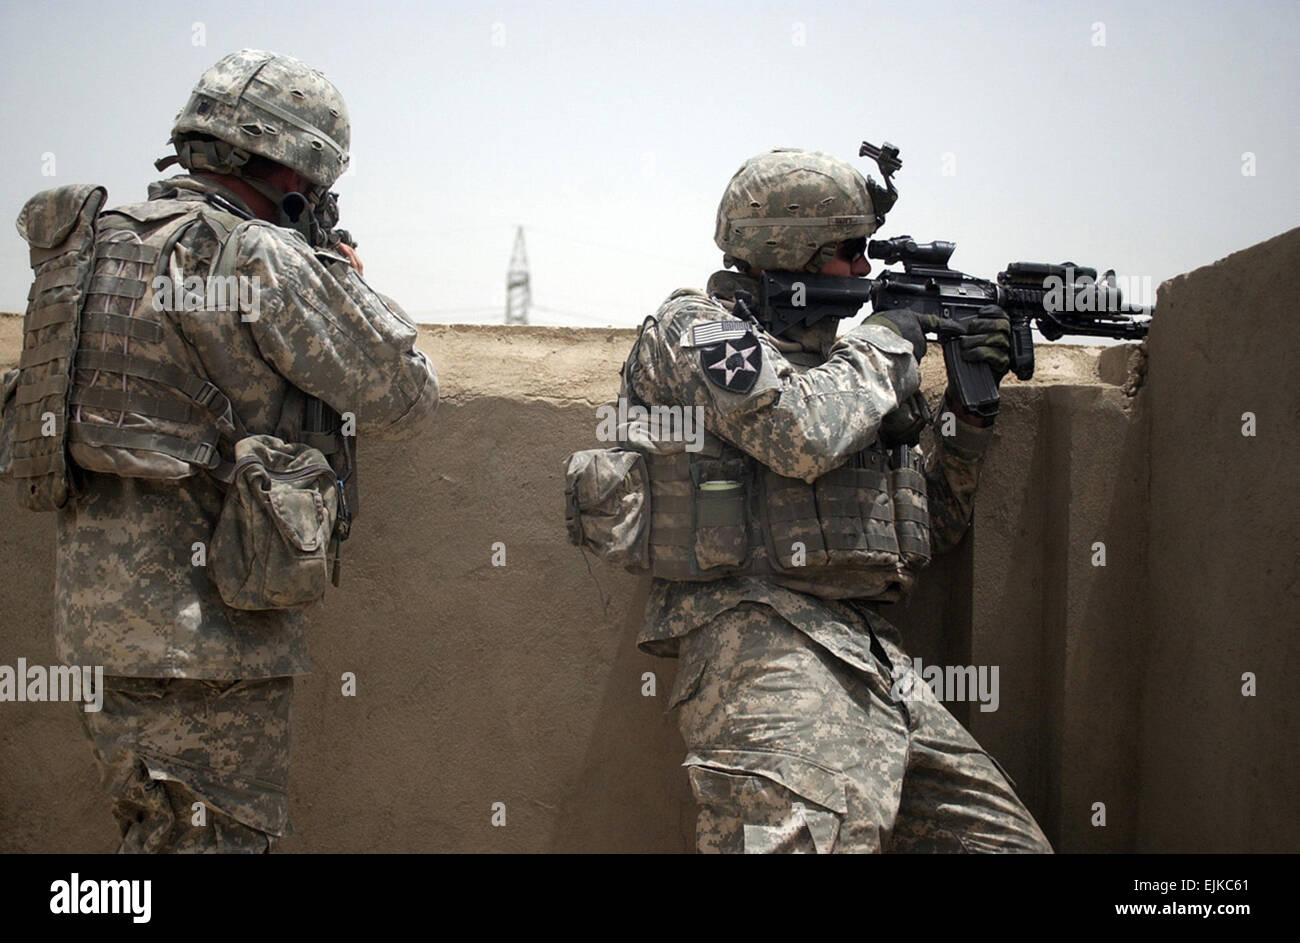 U.S. Army Sgts. Matthew Caulifield and Andrew Britt look for insurgents during a firefight in Rashid, Iraq, June 2, 2007. Both men are with Alpha Company, 2nd Battalion, 3rd Infantry Regiment, out of Fort Lewis, Wash.  Spc. Elisha Dawkins Stock Photo